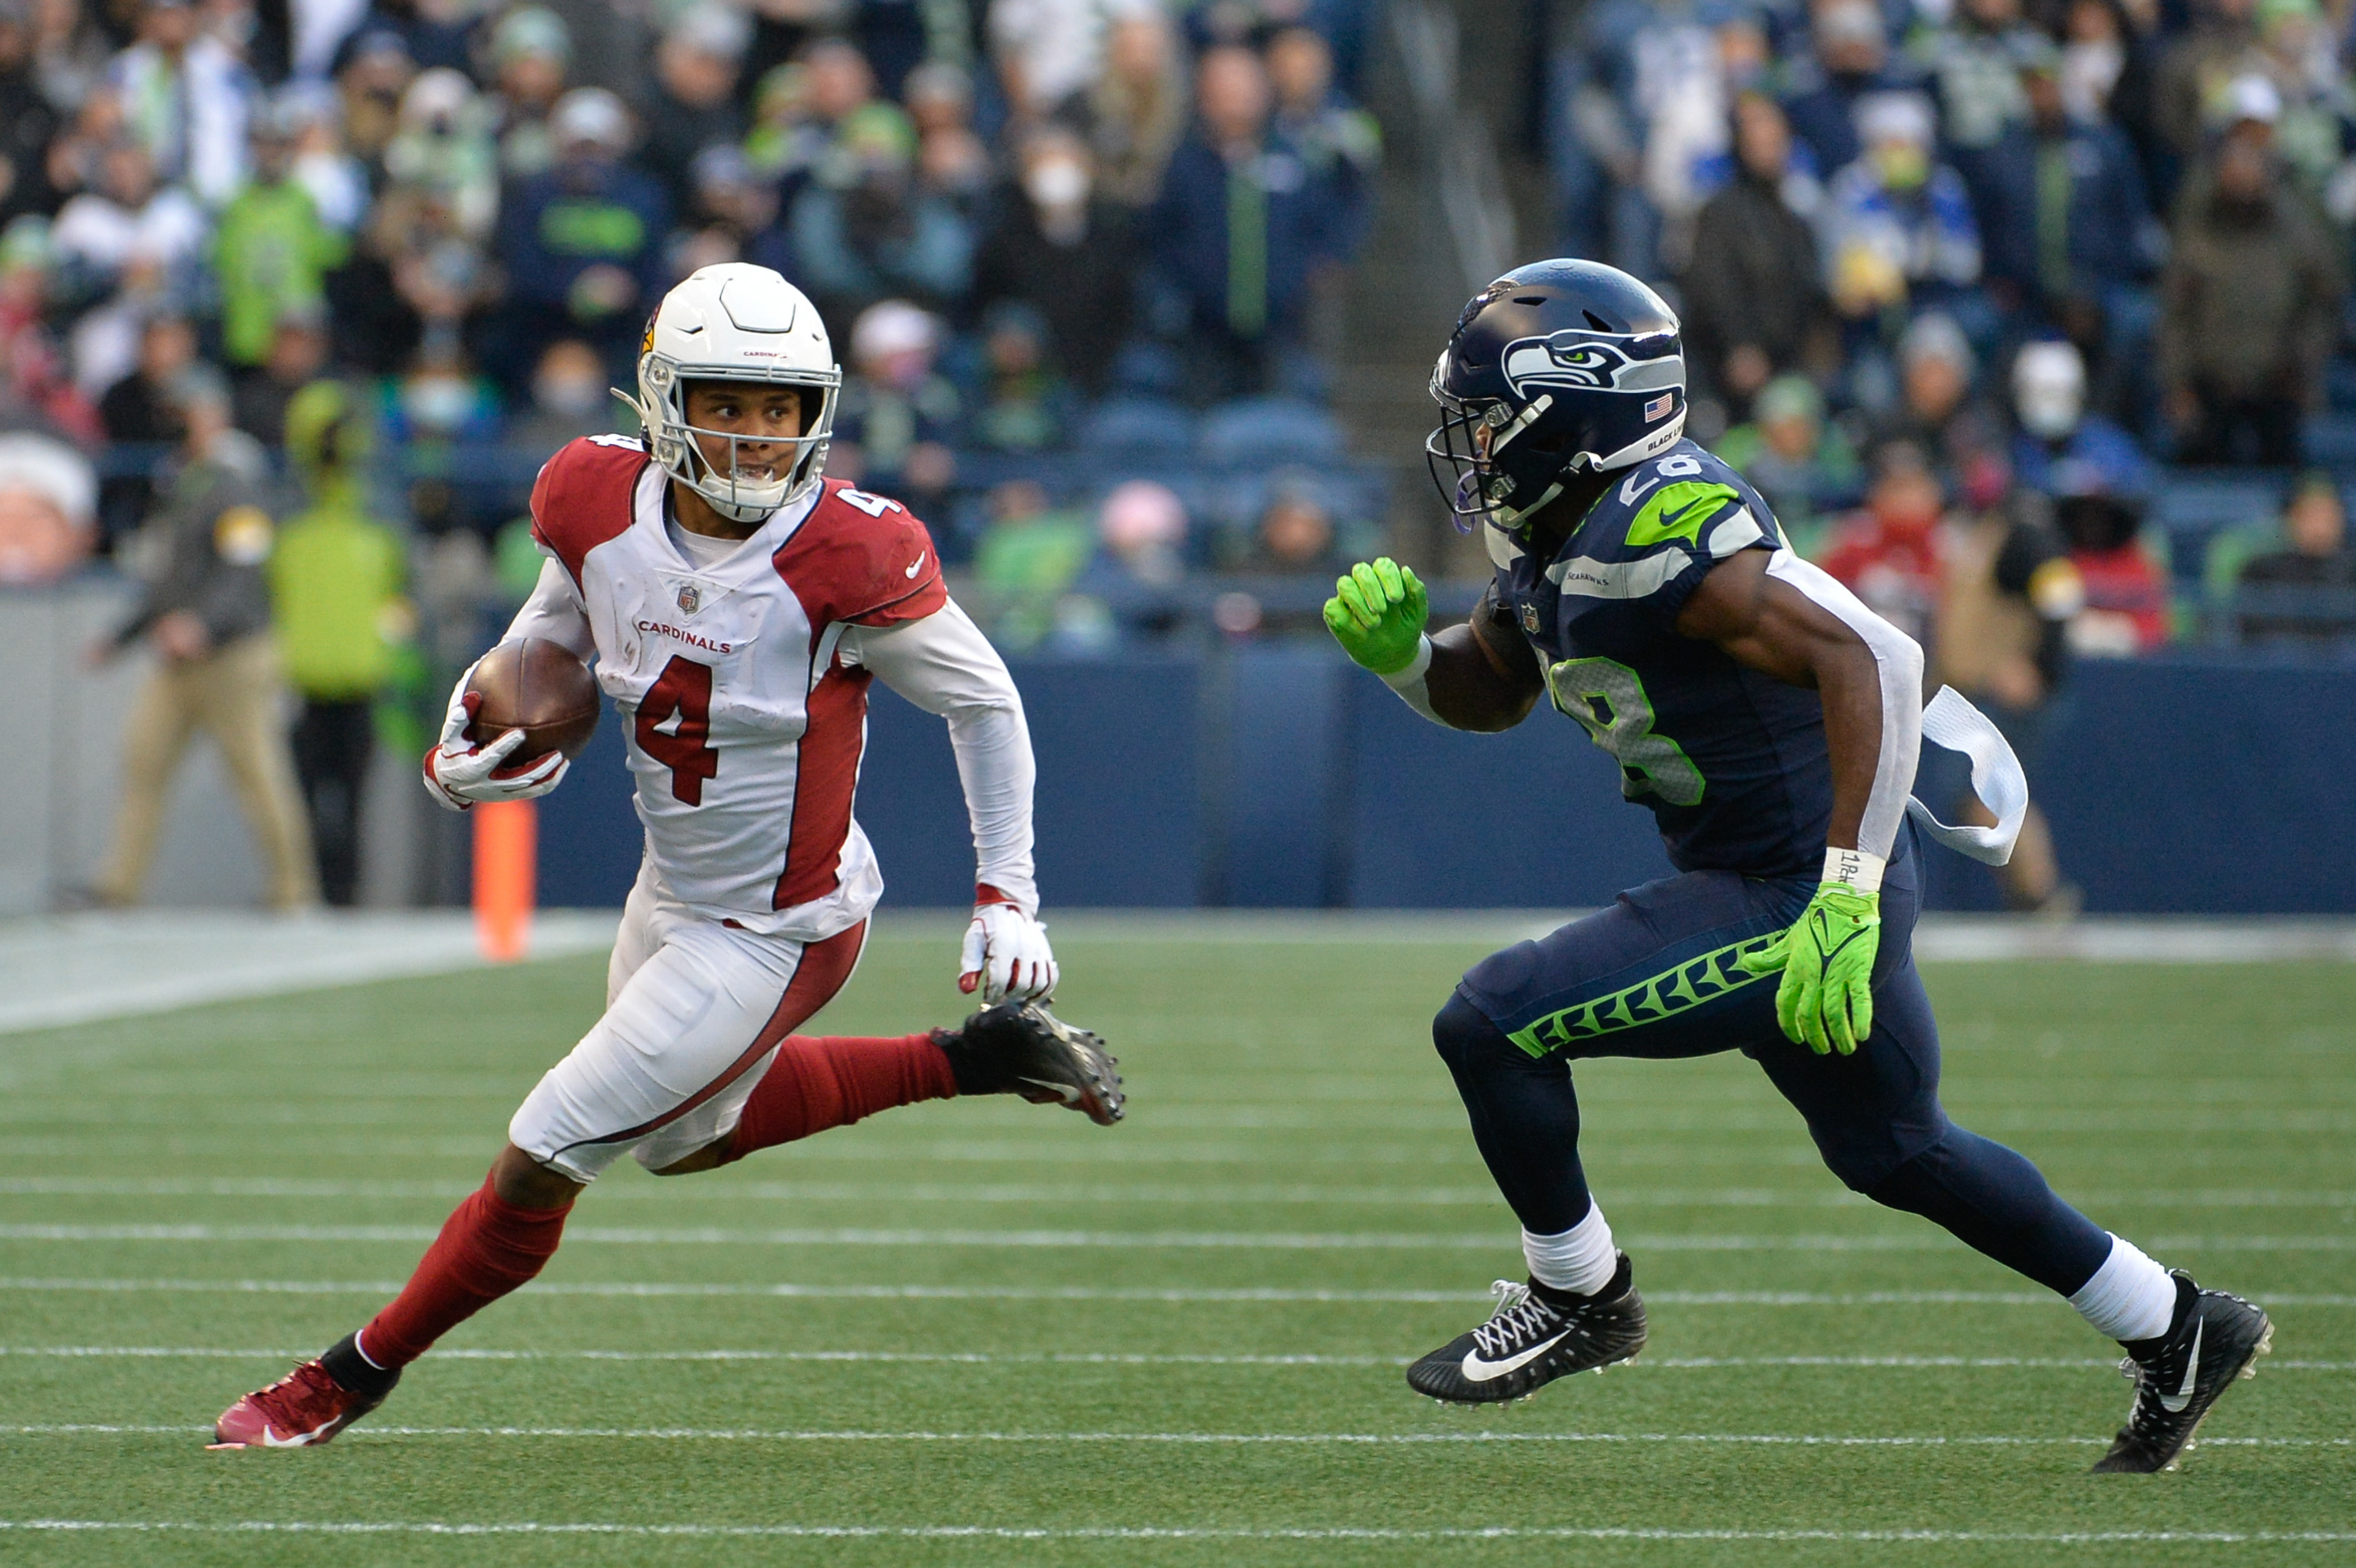 Arizona Cardinals wide receiver Rondale Moore (4) carries the ball while being chased by Seattle Seahawks cornerback Ugo Amadi (28) during the second half at Lumen Field. Arizona defeated Seattle 23-13.